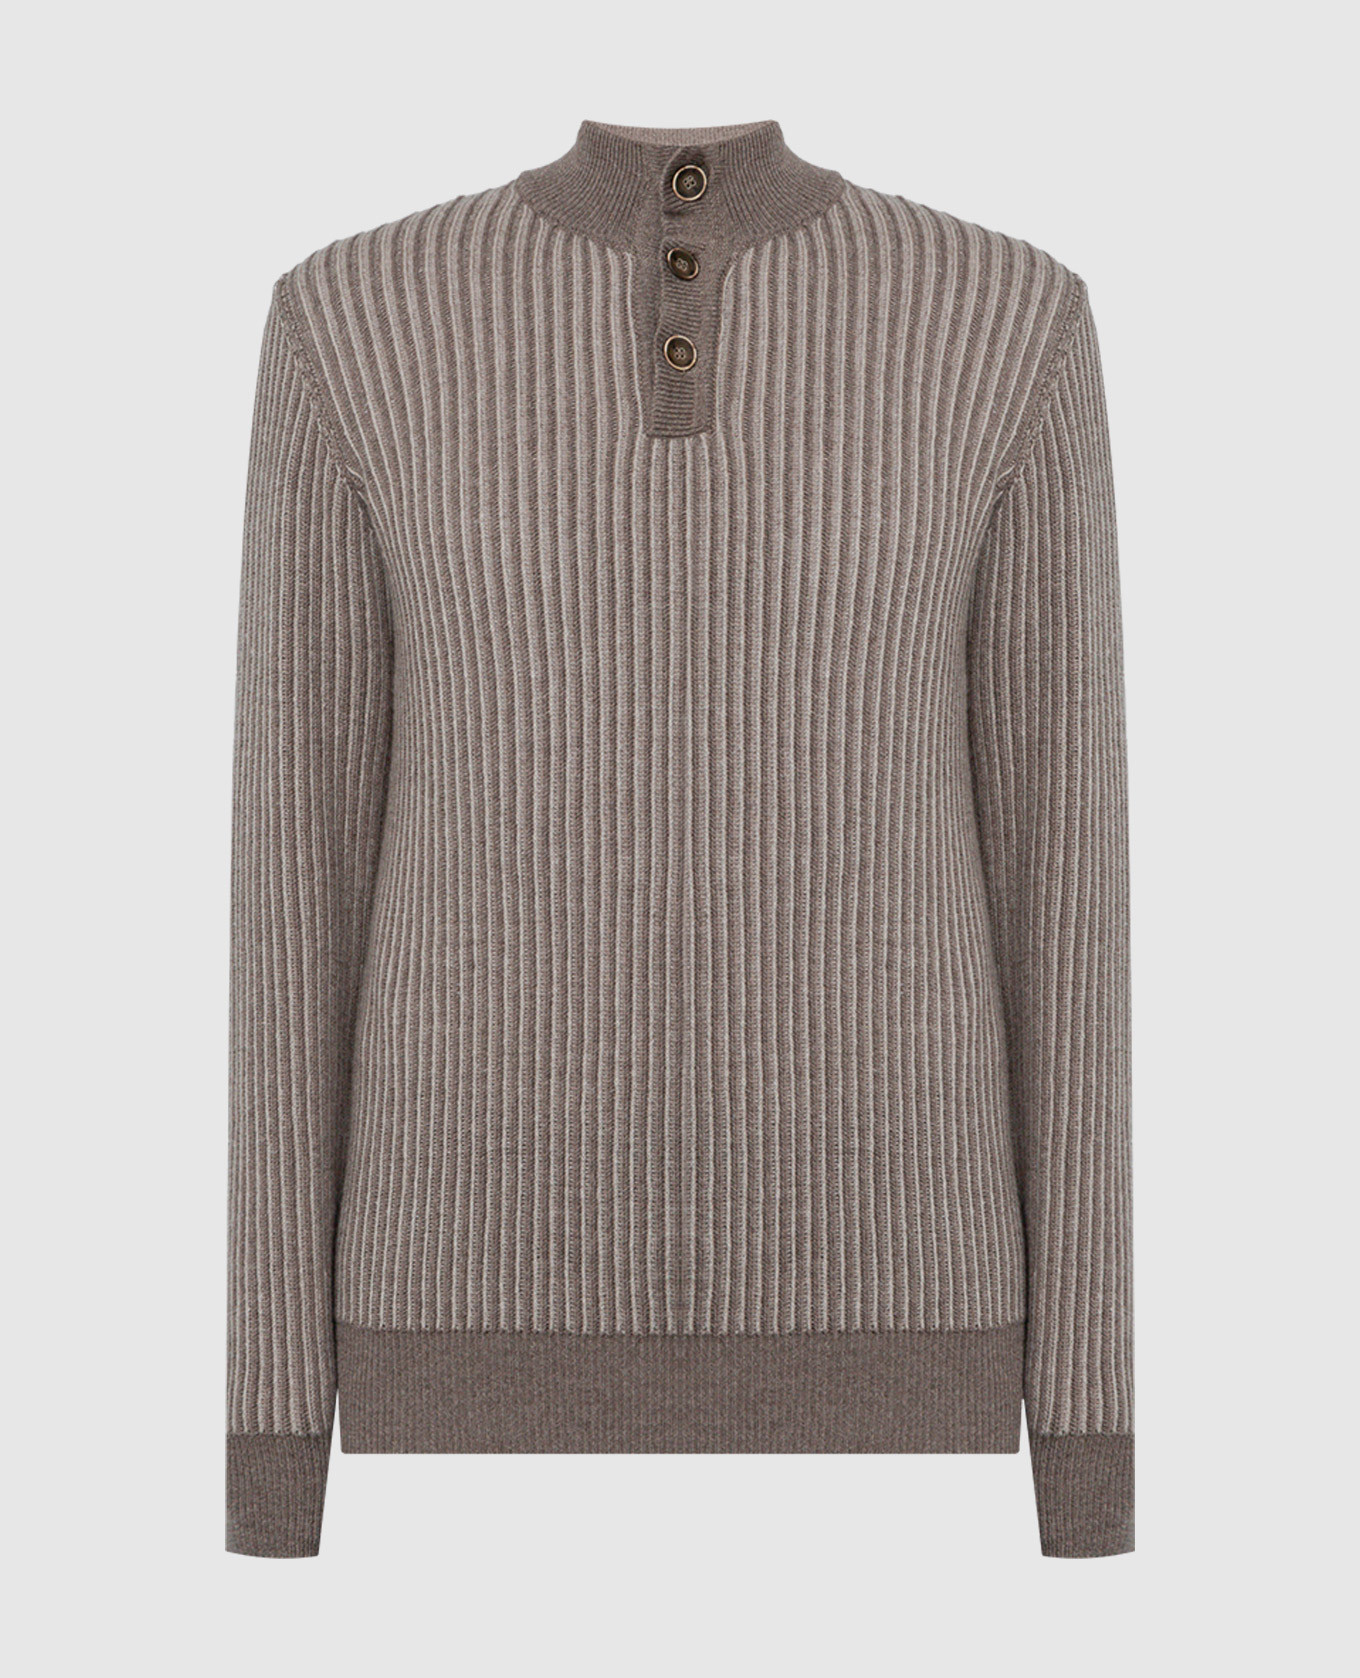 Brown striped wool and cashmere jumper